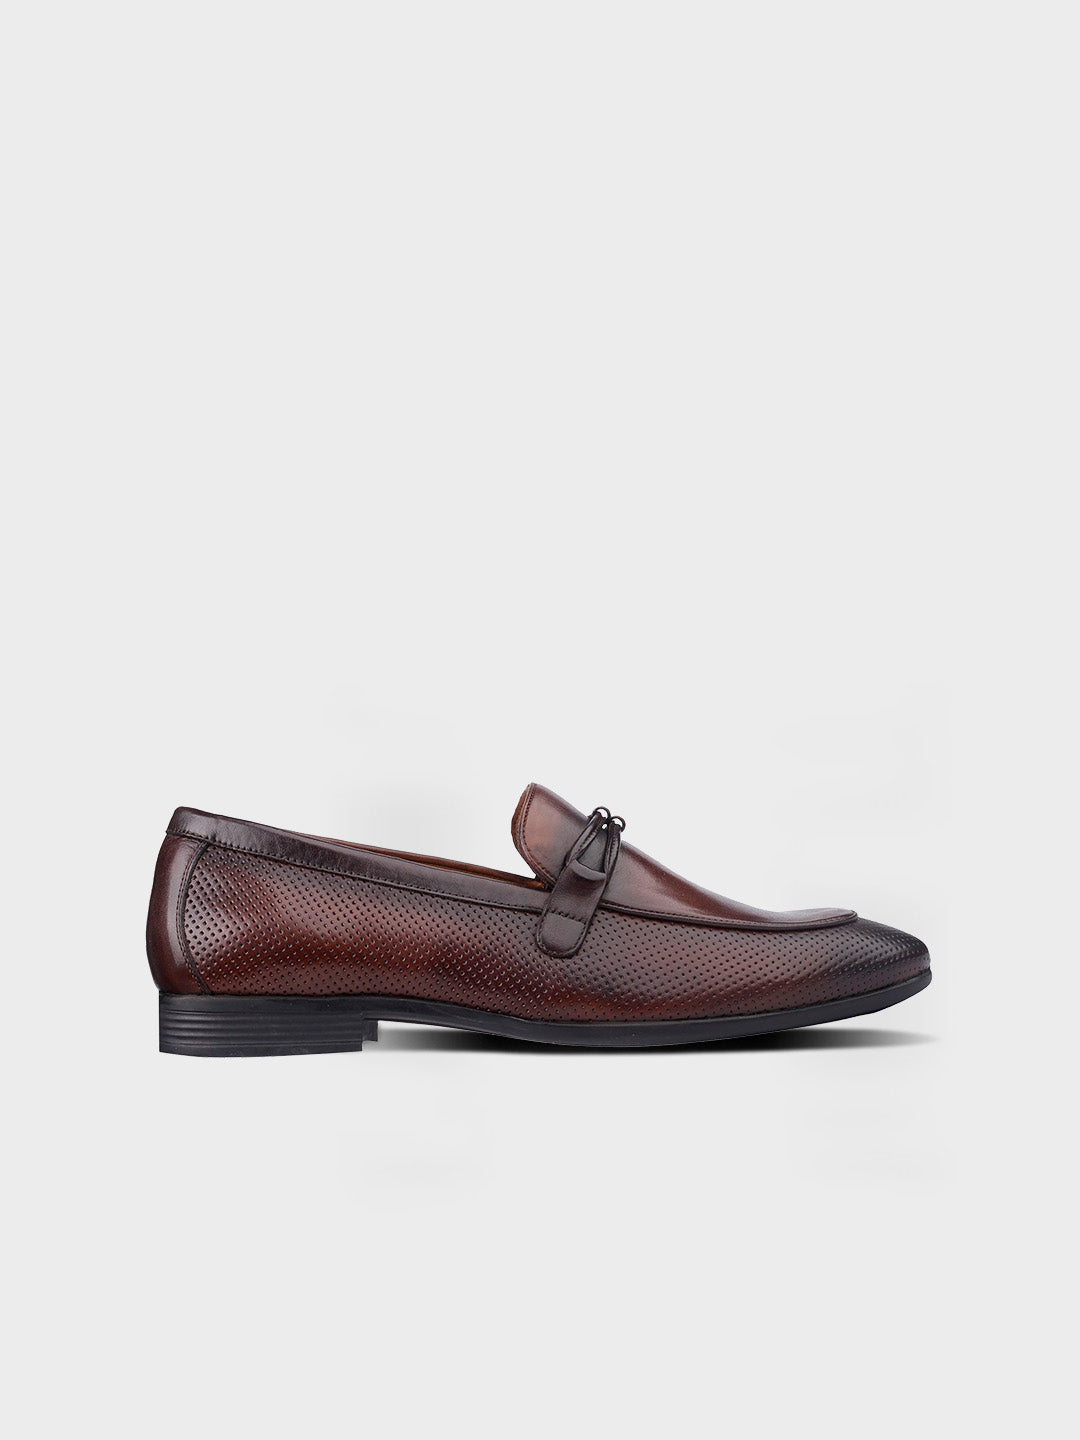 Classic Tan Leather Slip-On Loafers for Men